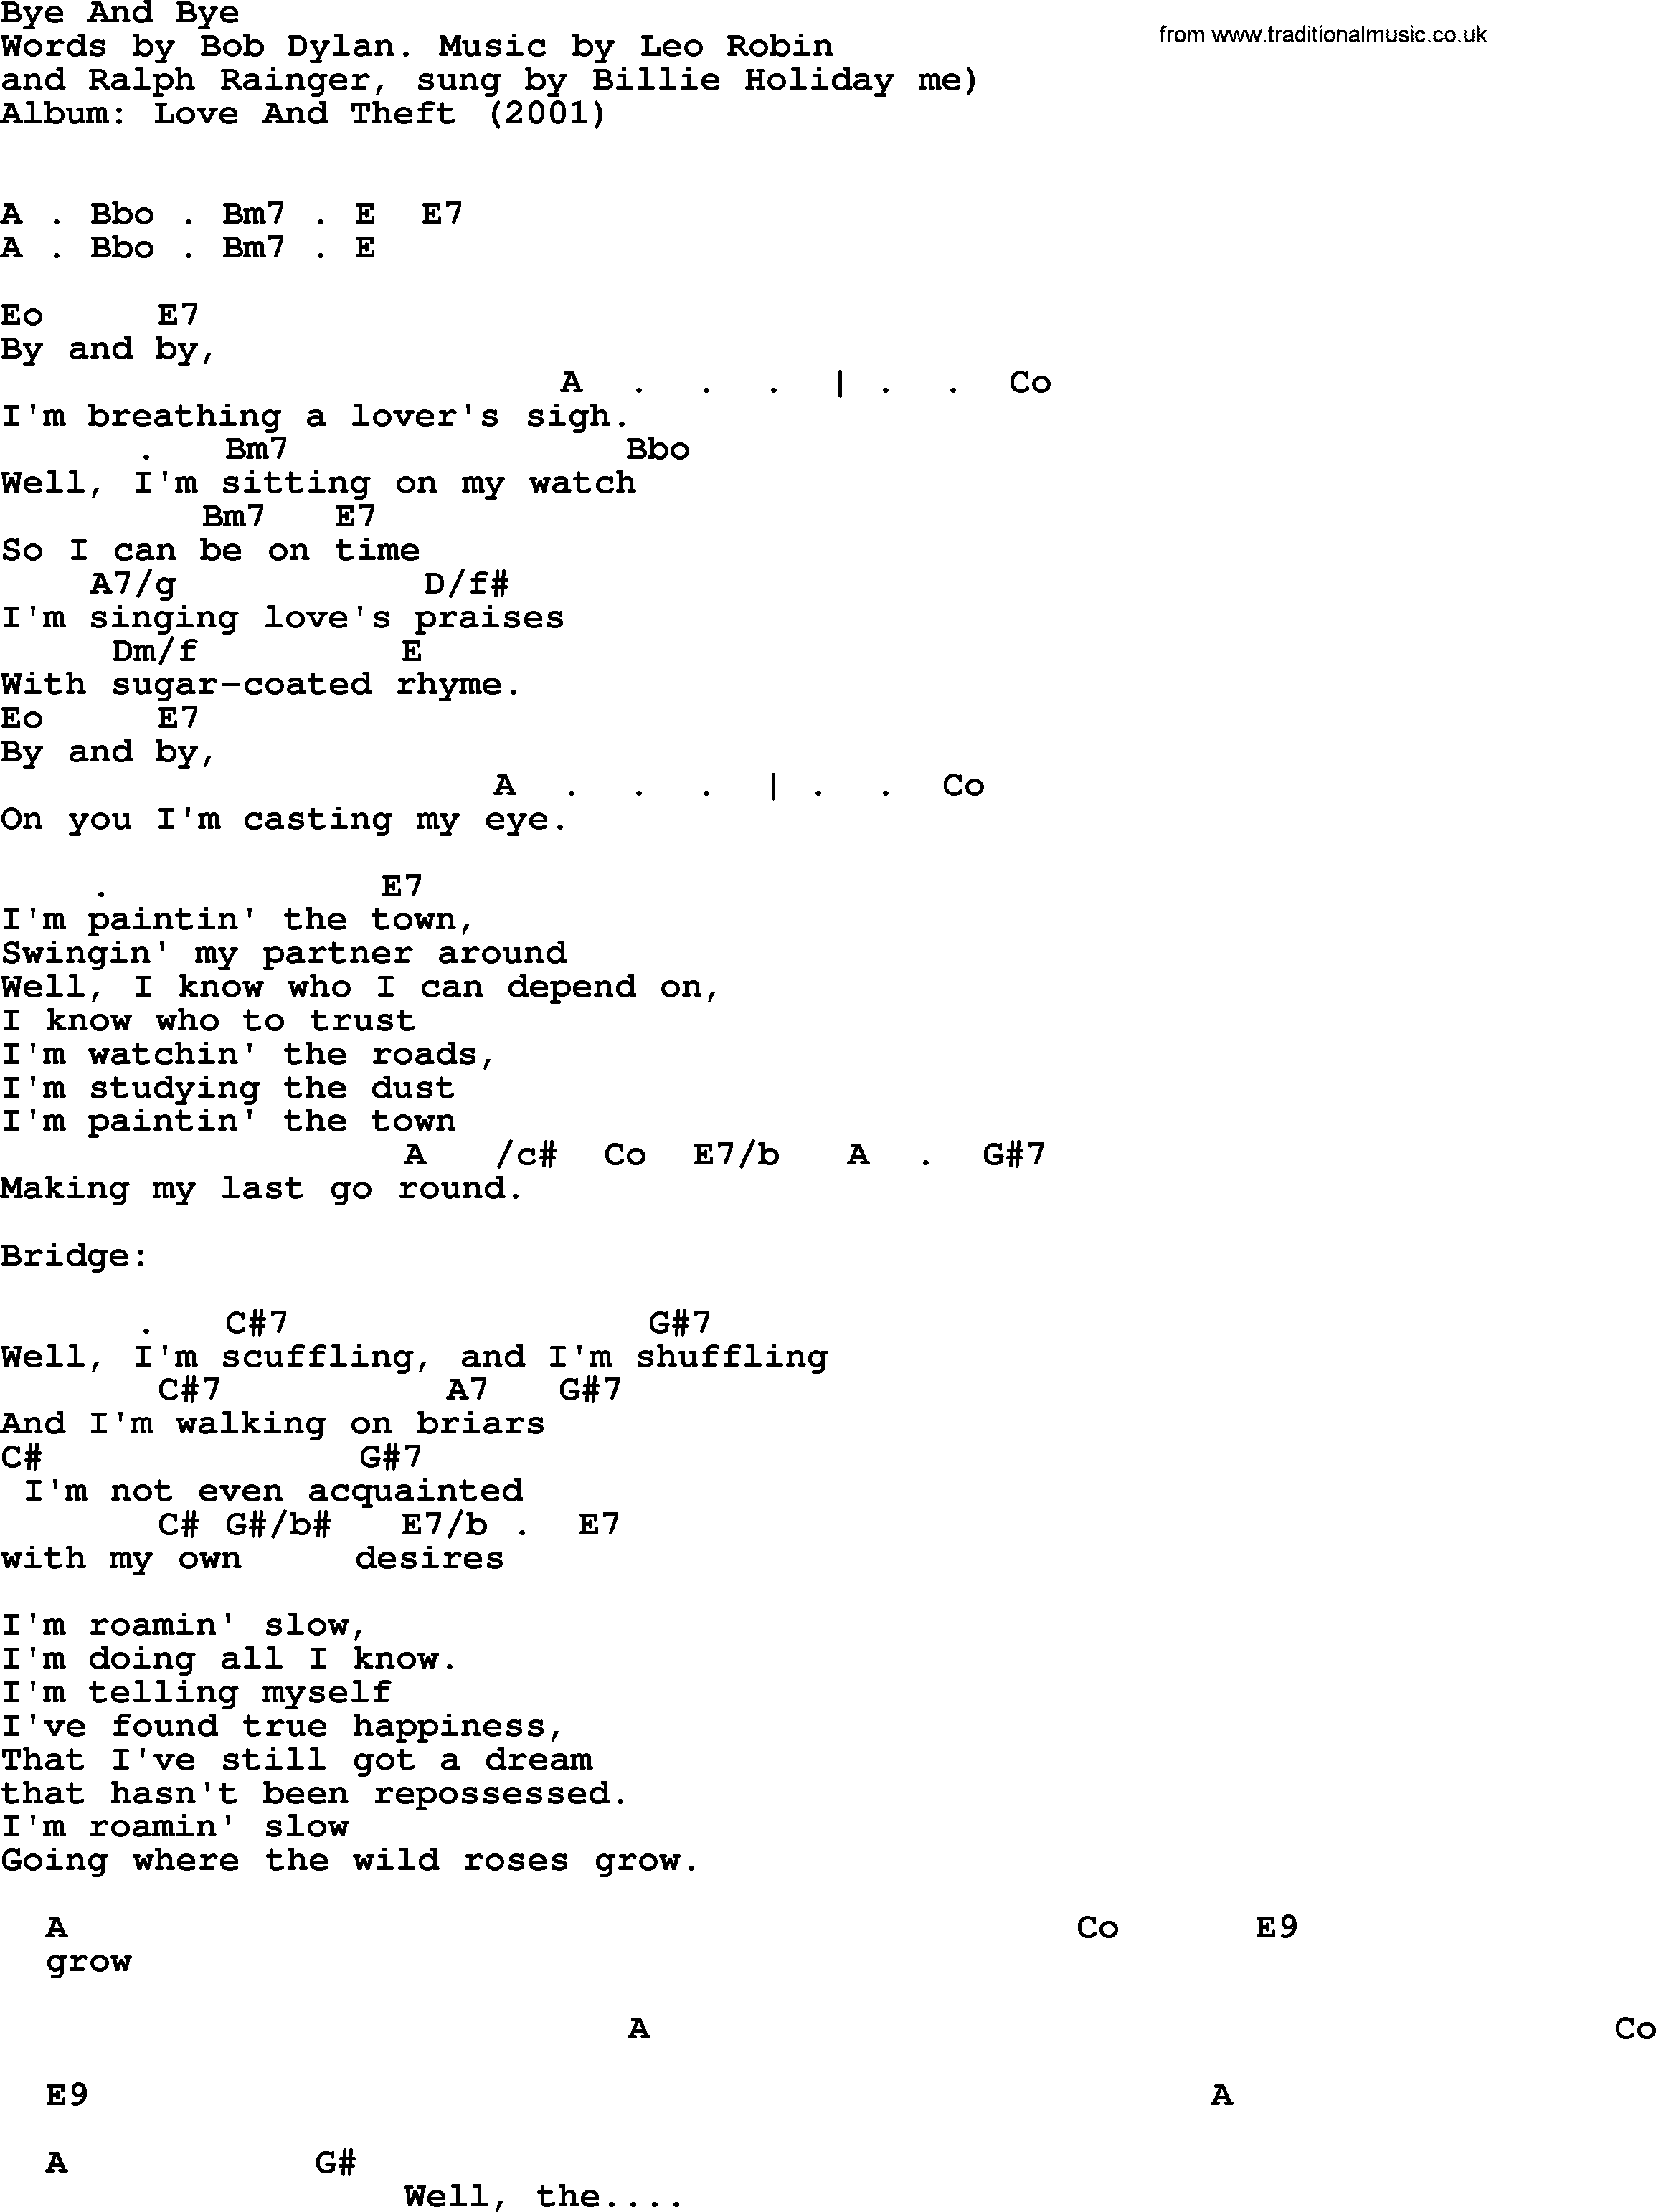 Bob Dylan Song Bye And Bye Lyrics And Chords